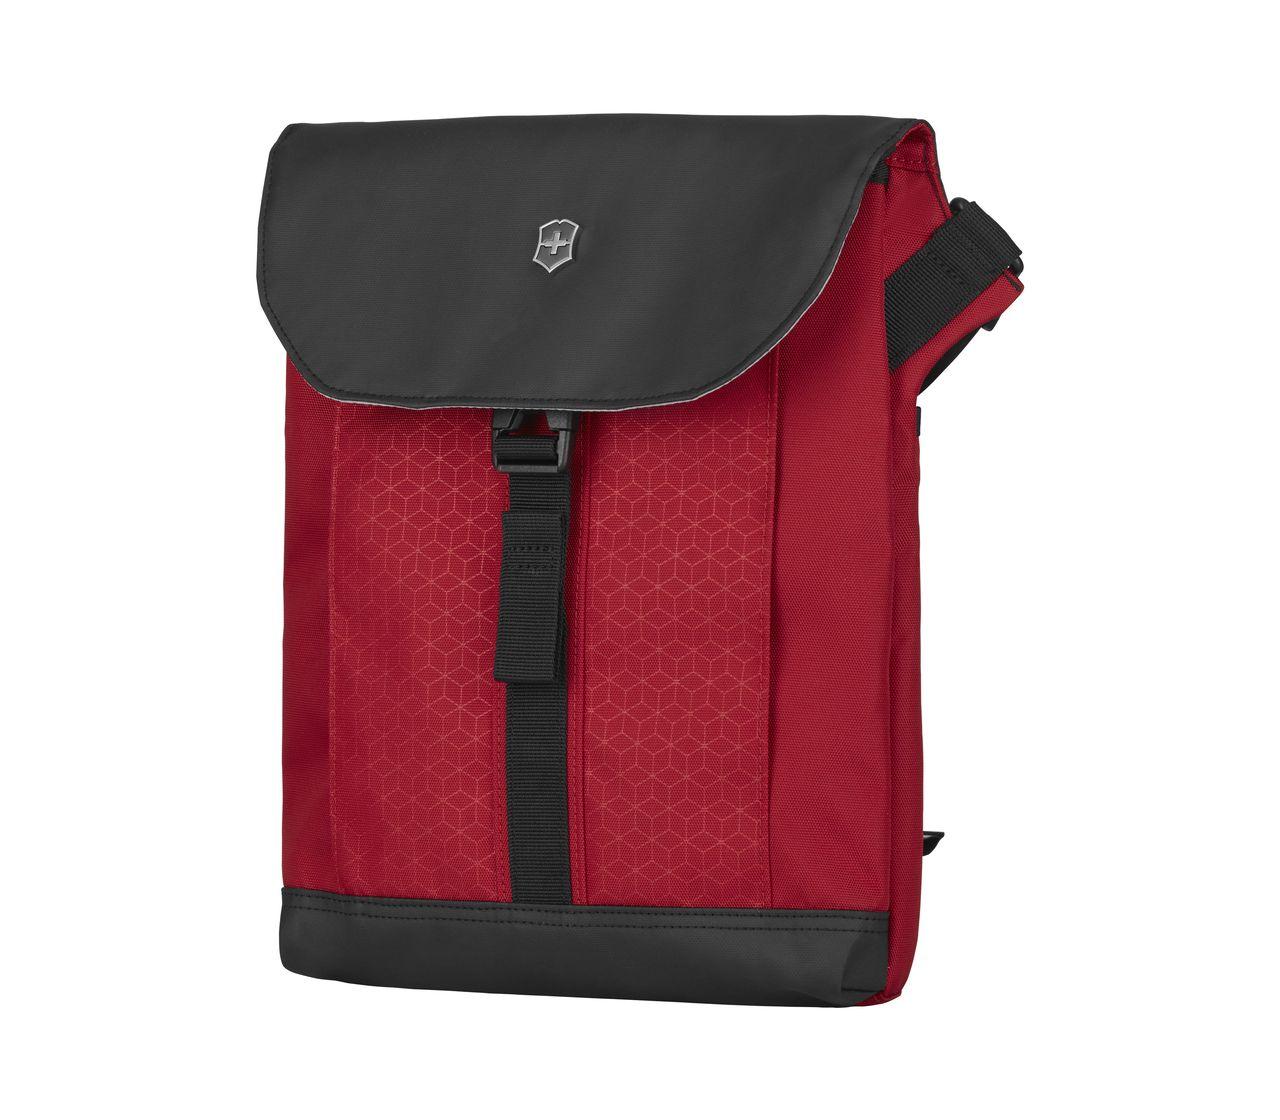 Cosmic Thaw, thaw, frost thaw Morse code Victorinox Altmont Original Flapover Digital Bag in red - 606753